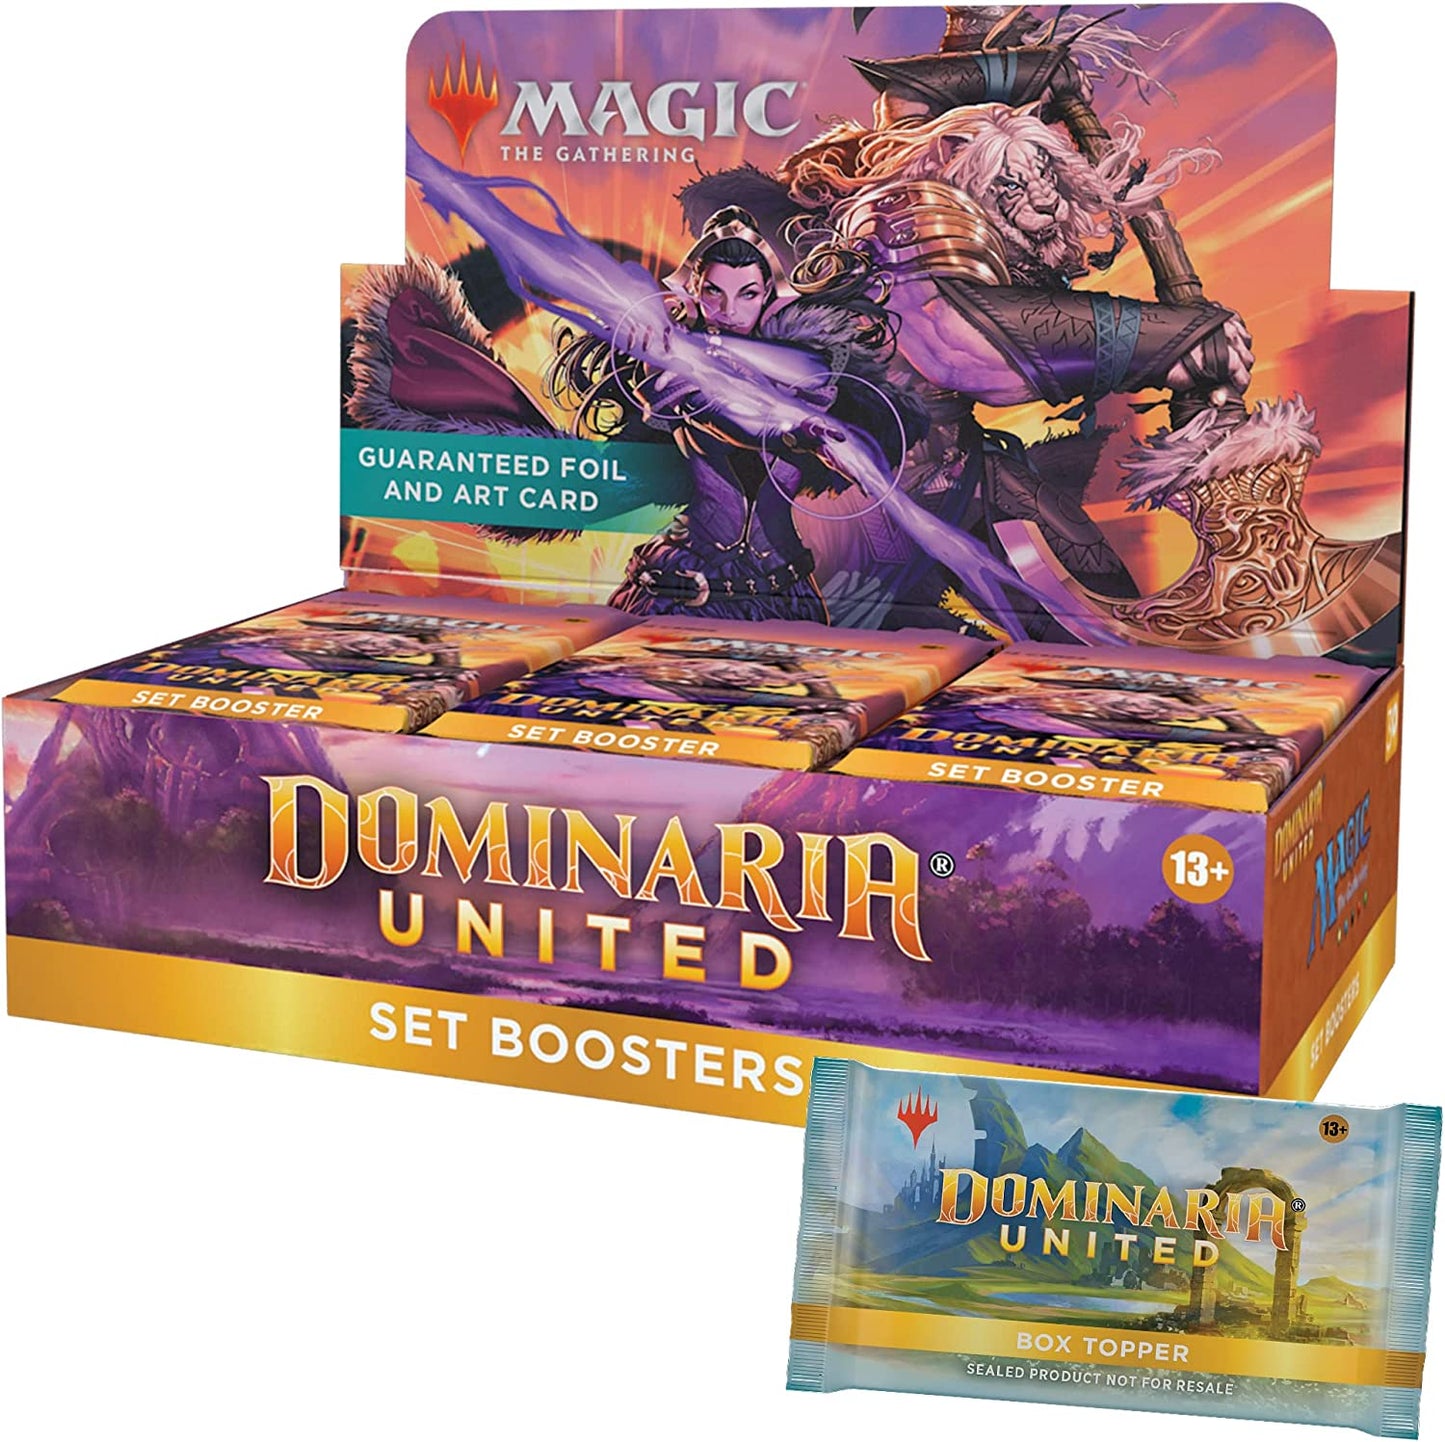 Magic: The Gathering - Dominaria United - Set Booster